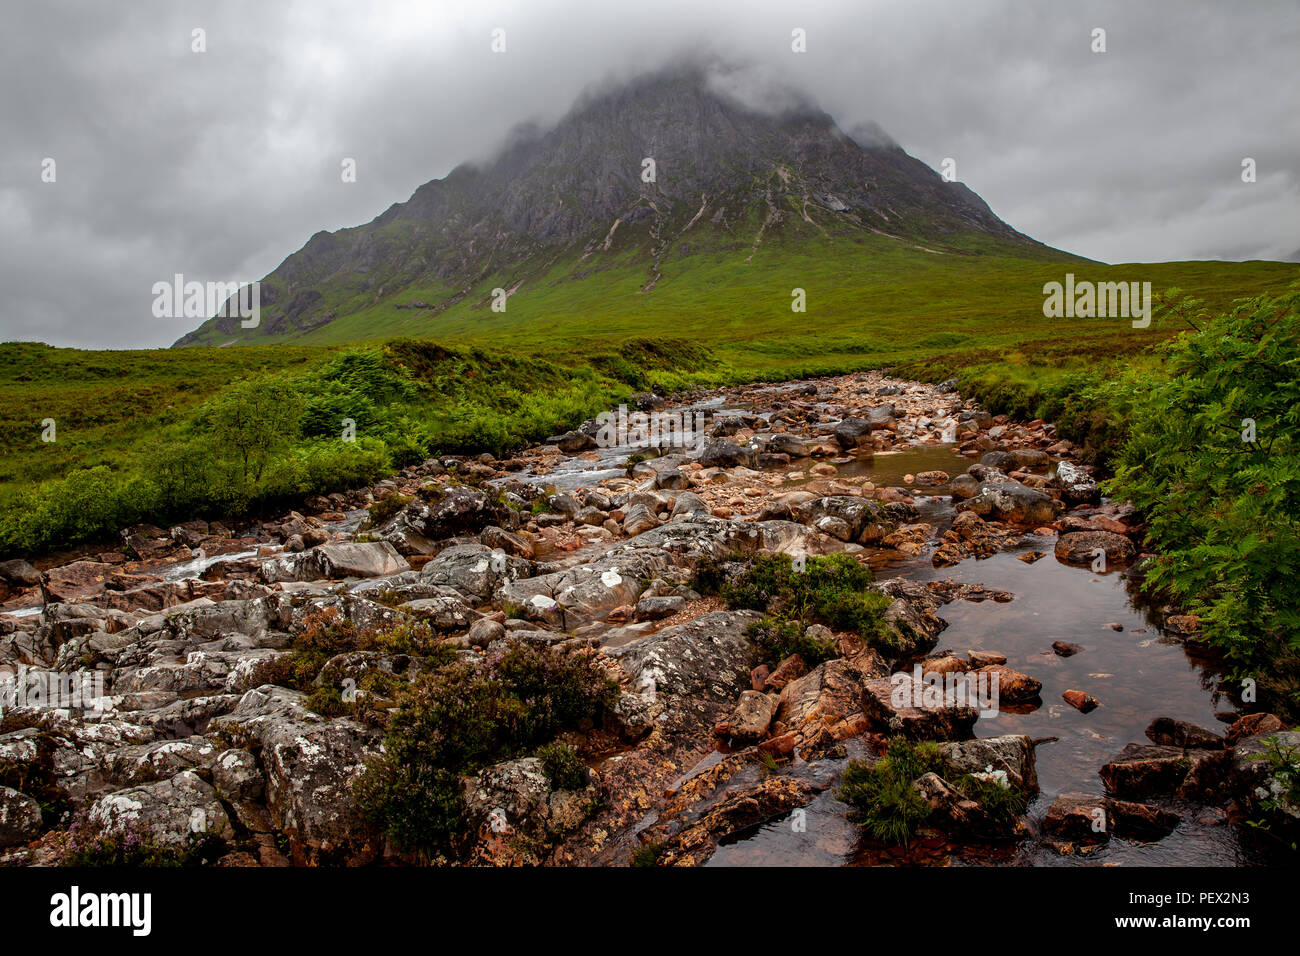 Typical weather Highlands Landscape in Ballachulish Scotland Nature Travel Stock Photo Alamy